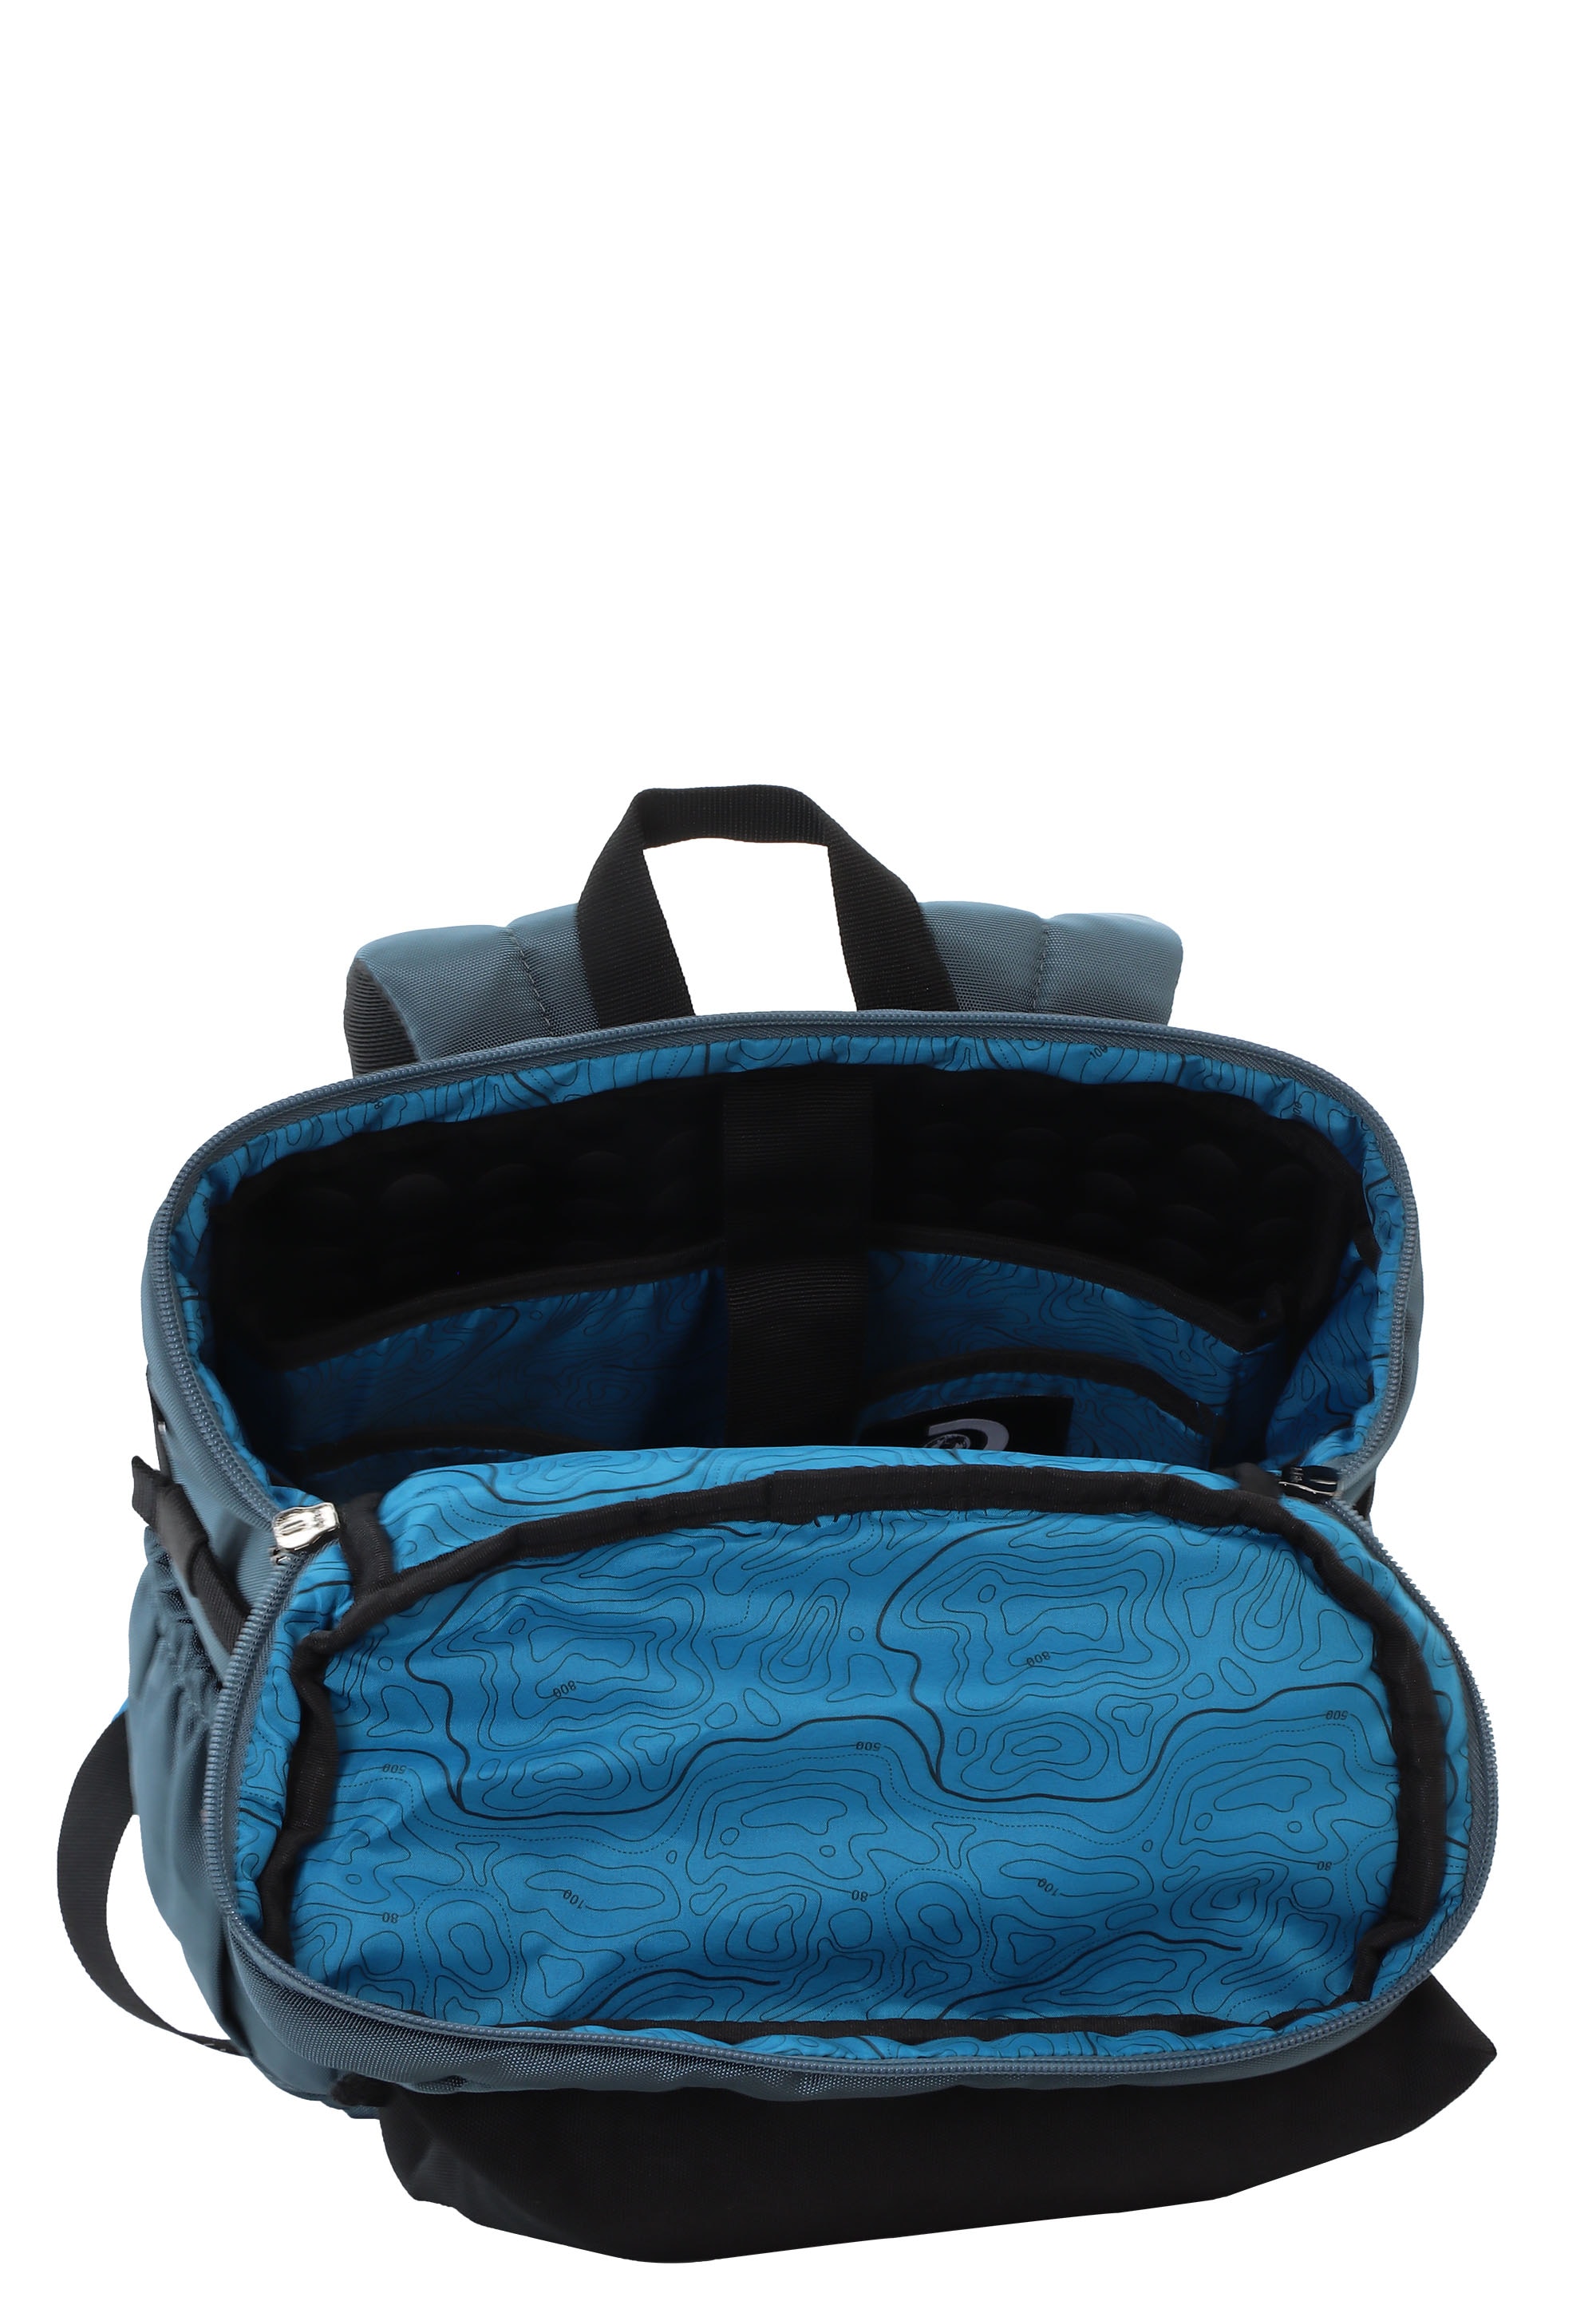 Discovery Sportrucksack »Icon«, aus robustem rPet Polyester-Material